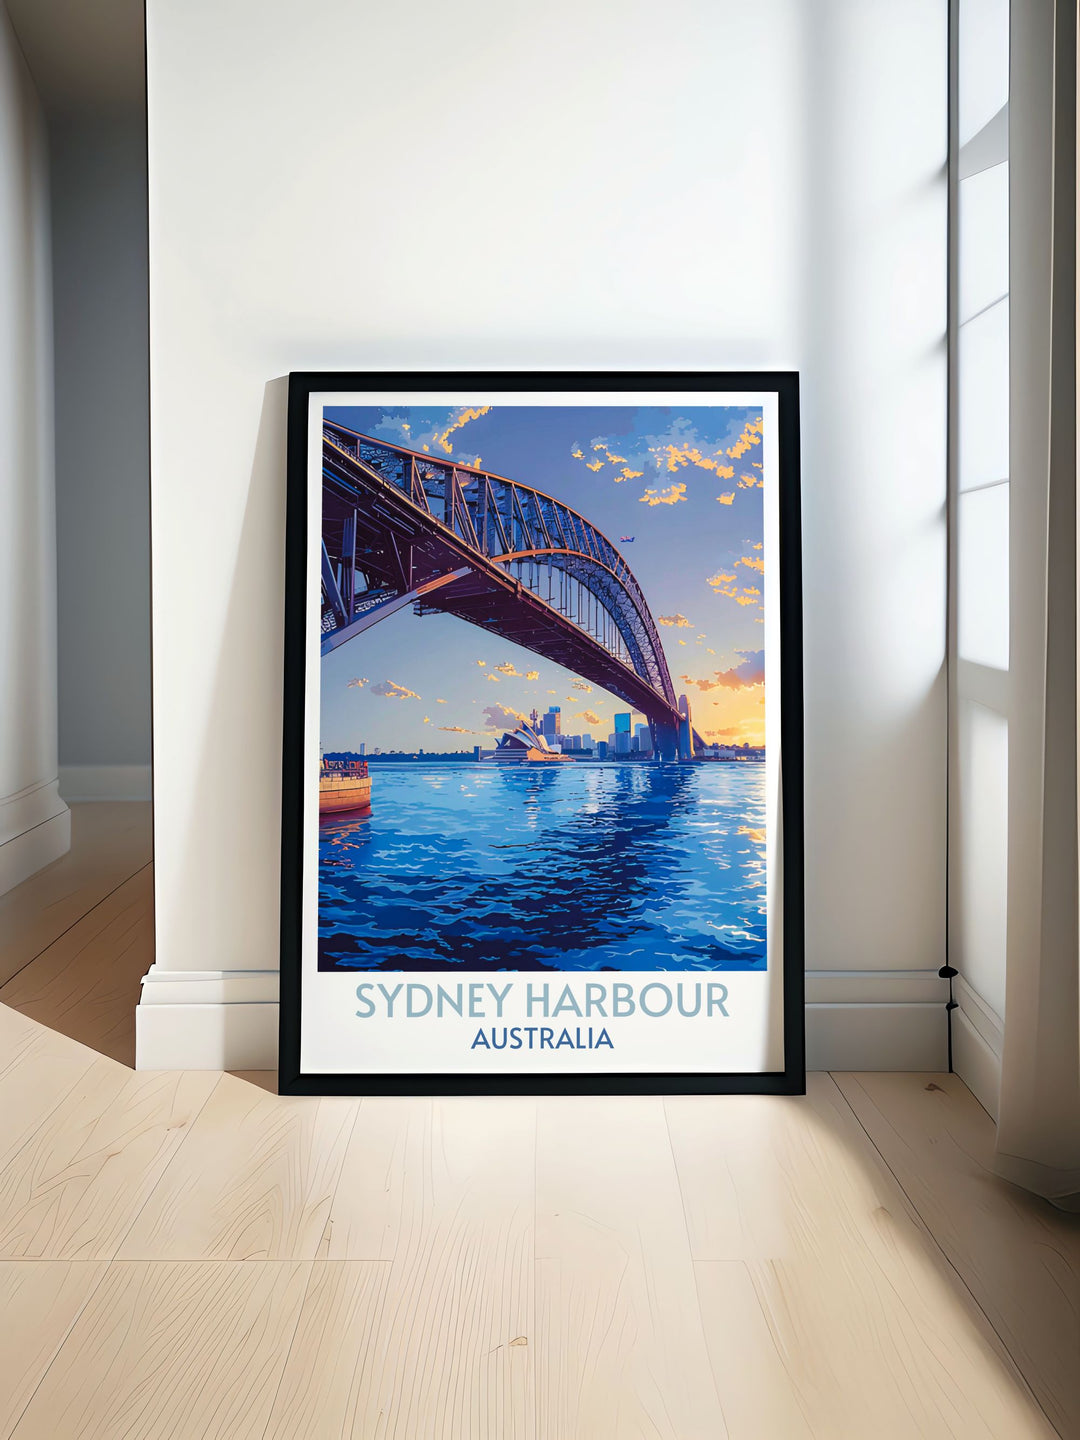 View of Sydney Harbour Bridge with vibrant fireworks display, perfect for enhancing modern wall decor.